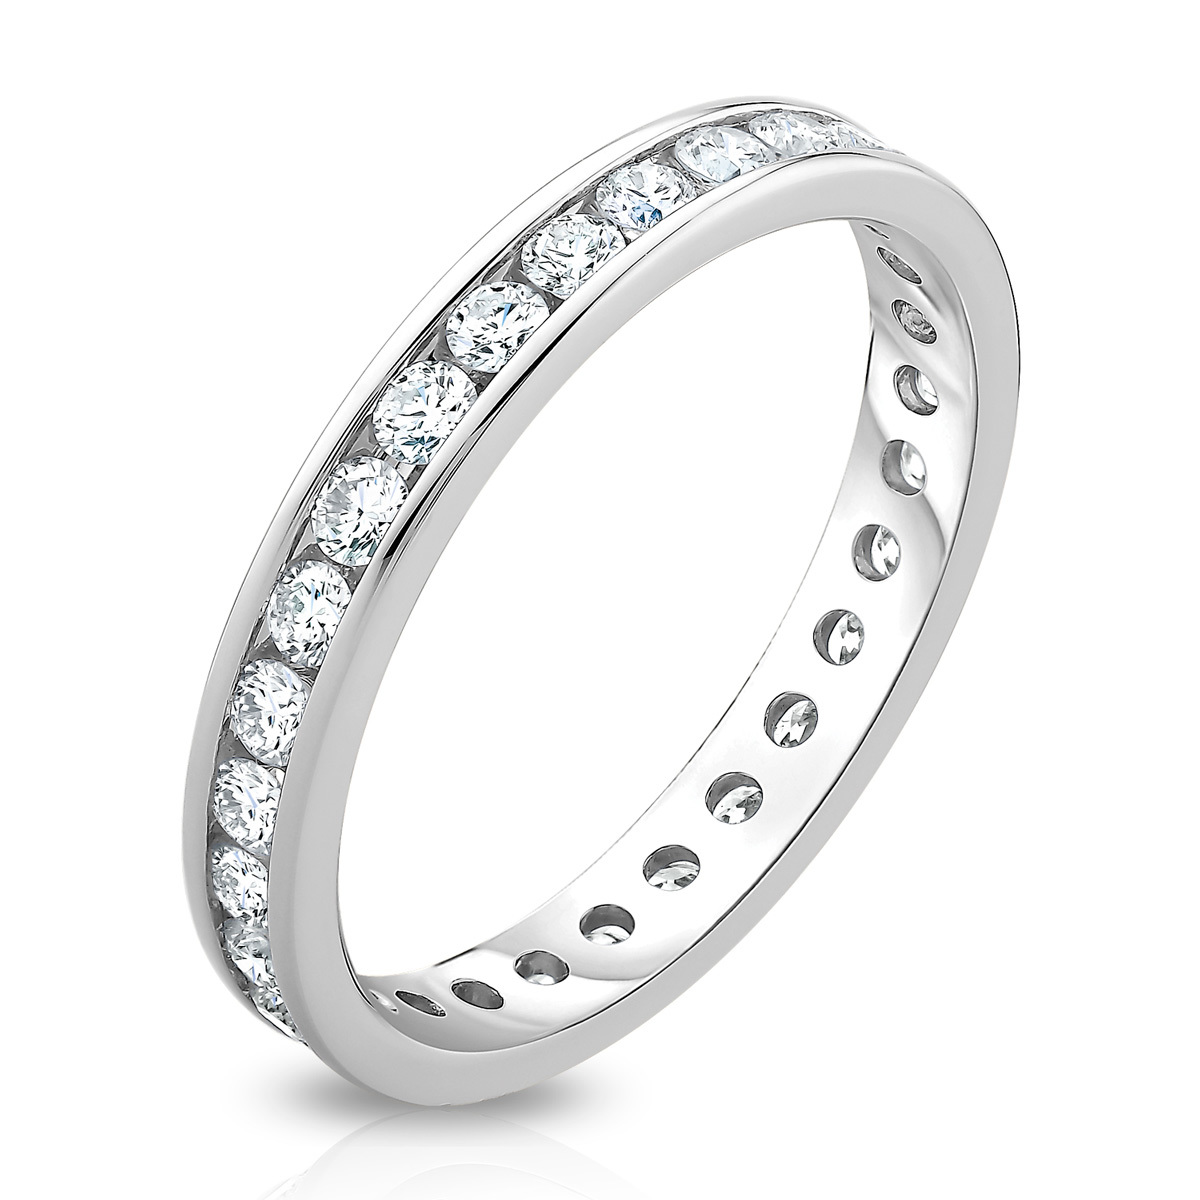 1.00ctw Round Brilliant Cut Channel Set Diamond Eternity Ring, 18ct White Gold - in 2 Sizes